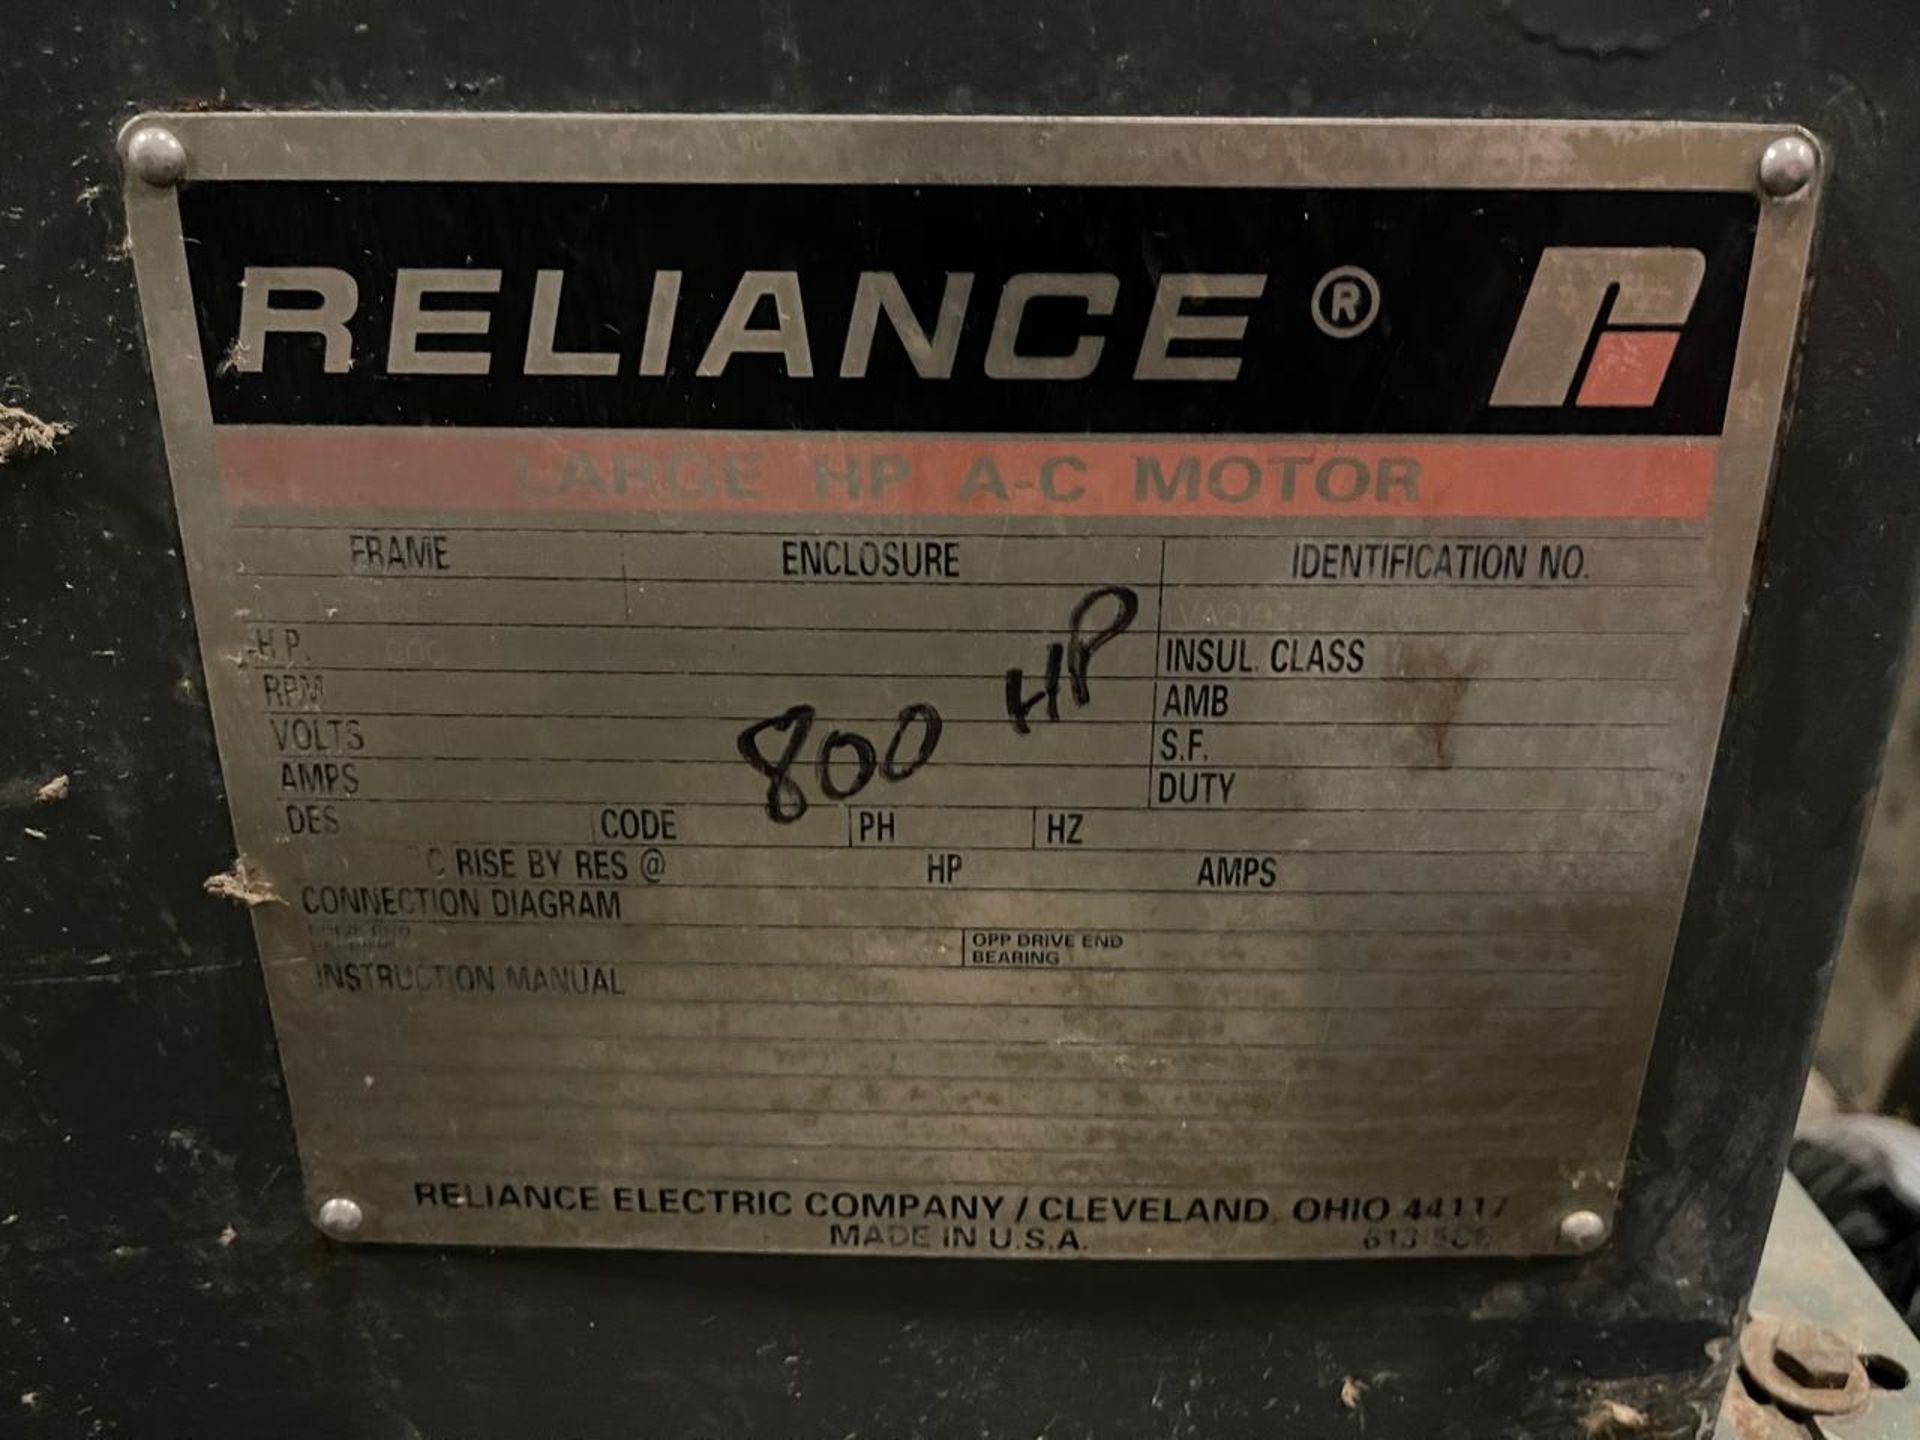 RELIANCE 800 HP REFINER MOTOR 594 RPM 4160 VOLTS - Image 3 of 3